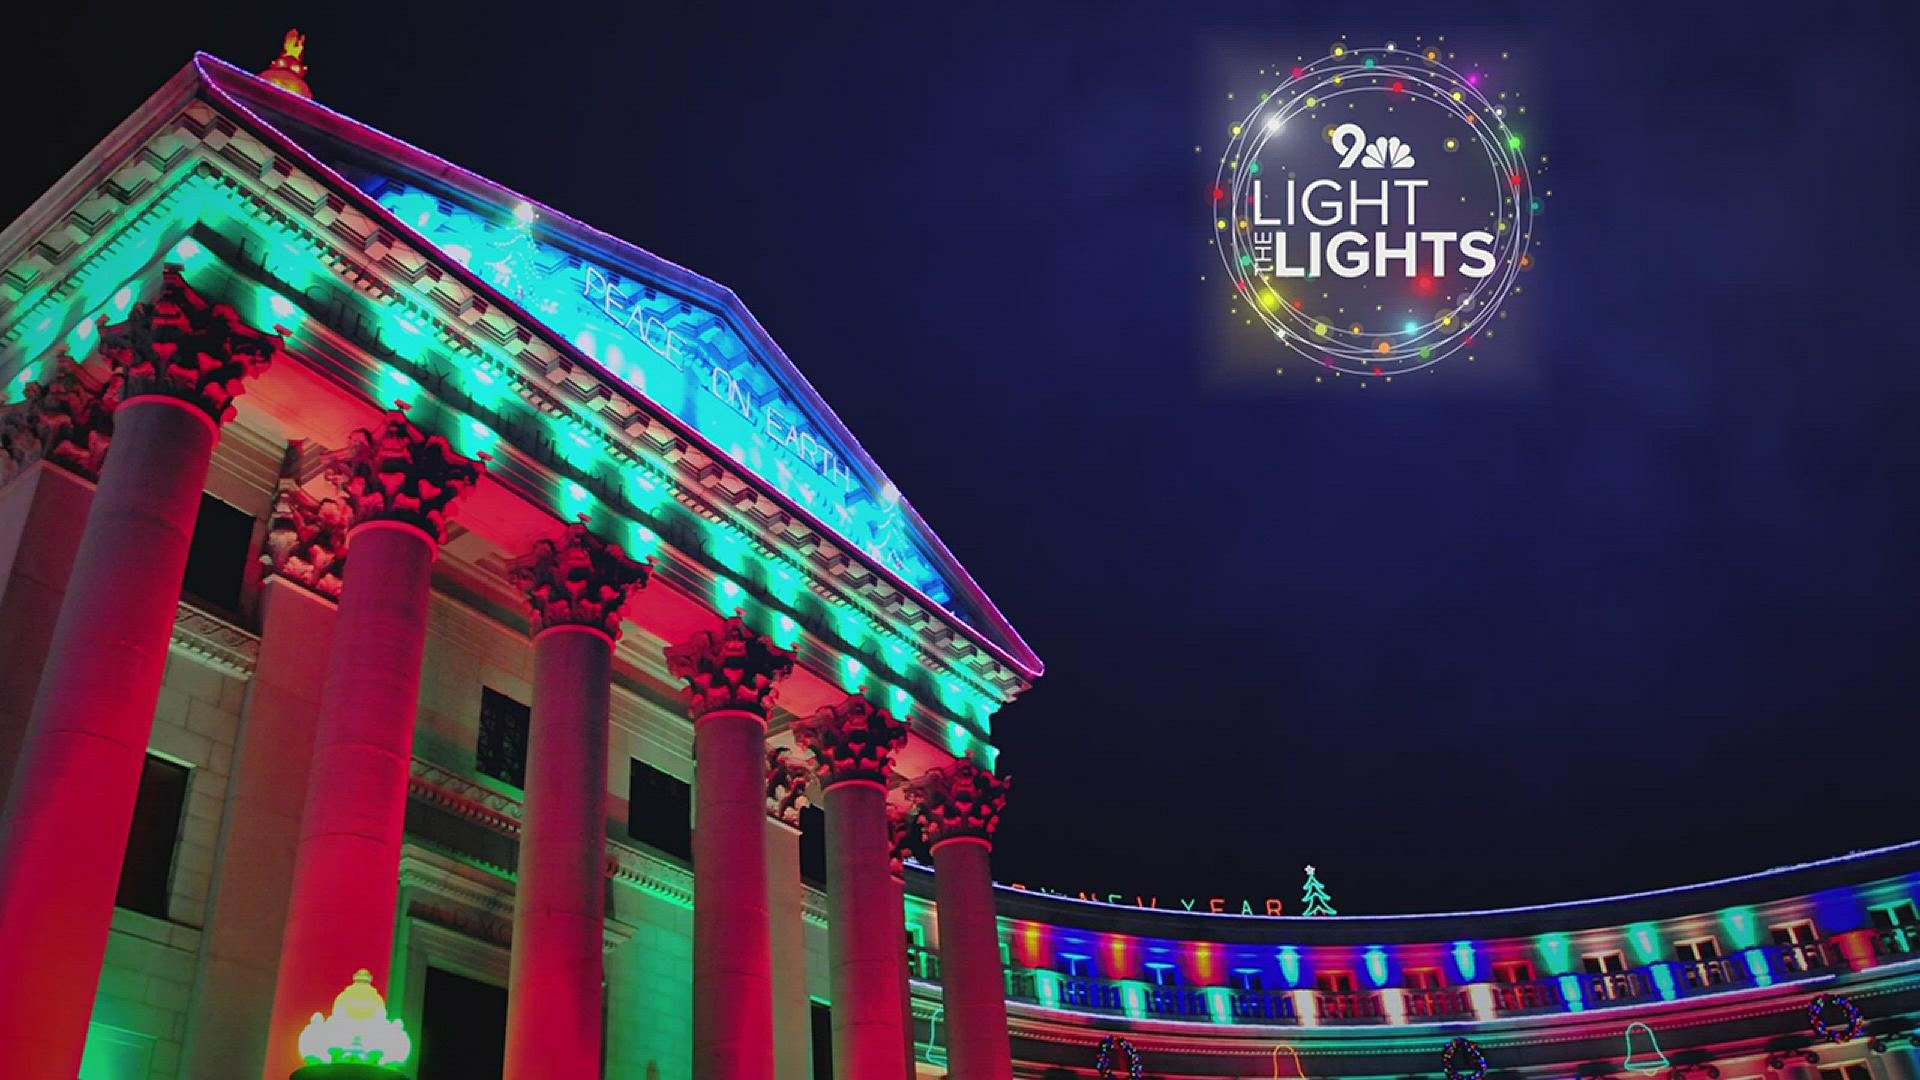 The City and County of Denver and 9NEWS present the annual lighting of the Denver City and County Building on Friday, Nov. 23, 2018.